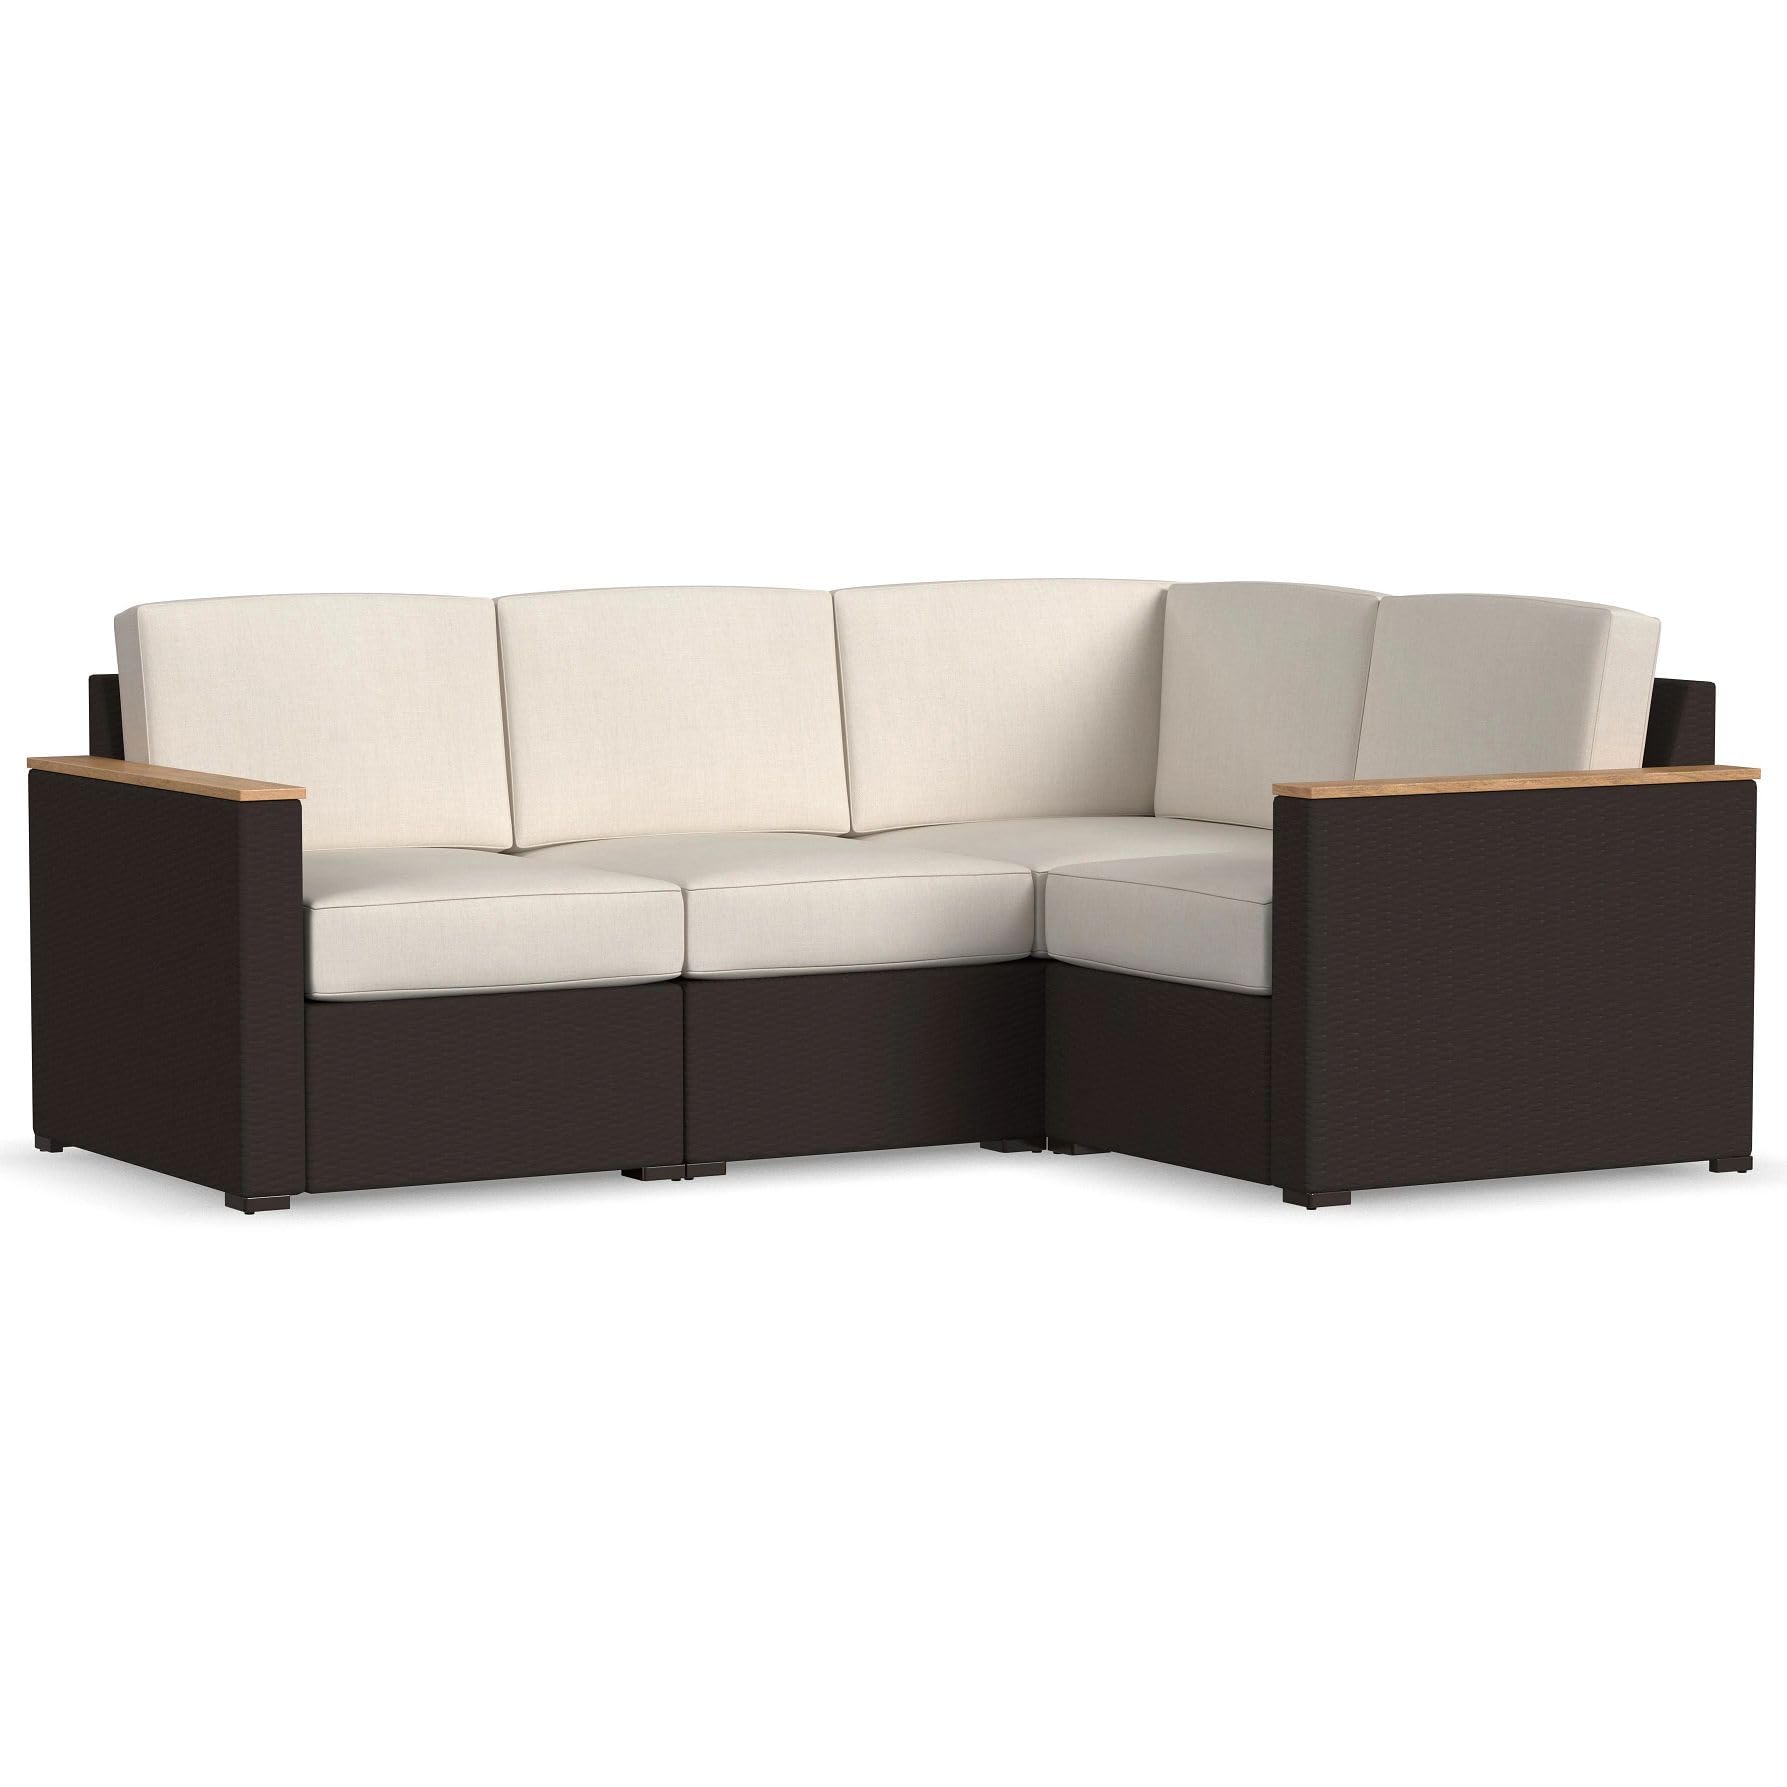 4-Piece Wicker Rattan Outdoor Sectional with Cushions $276.92